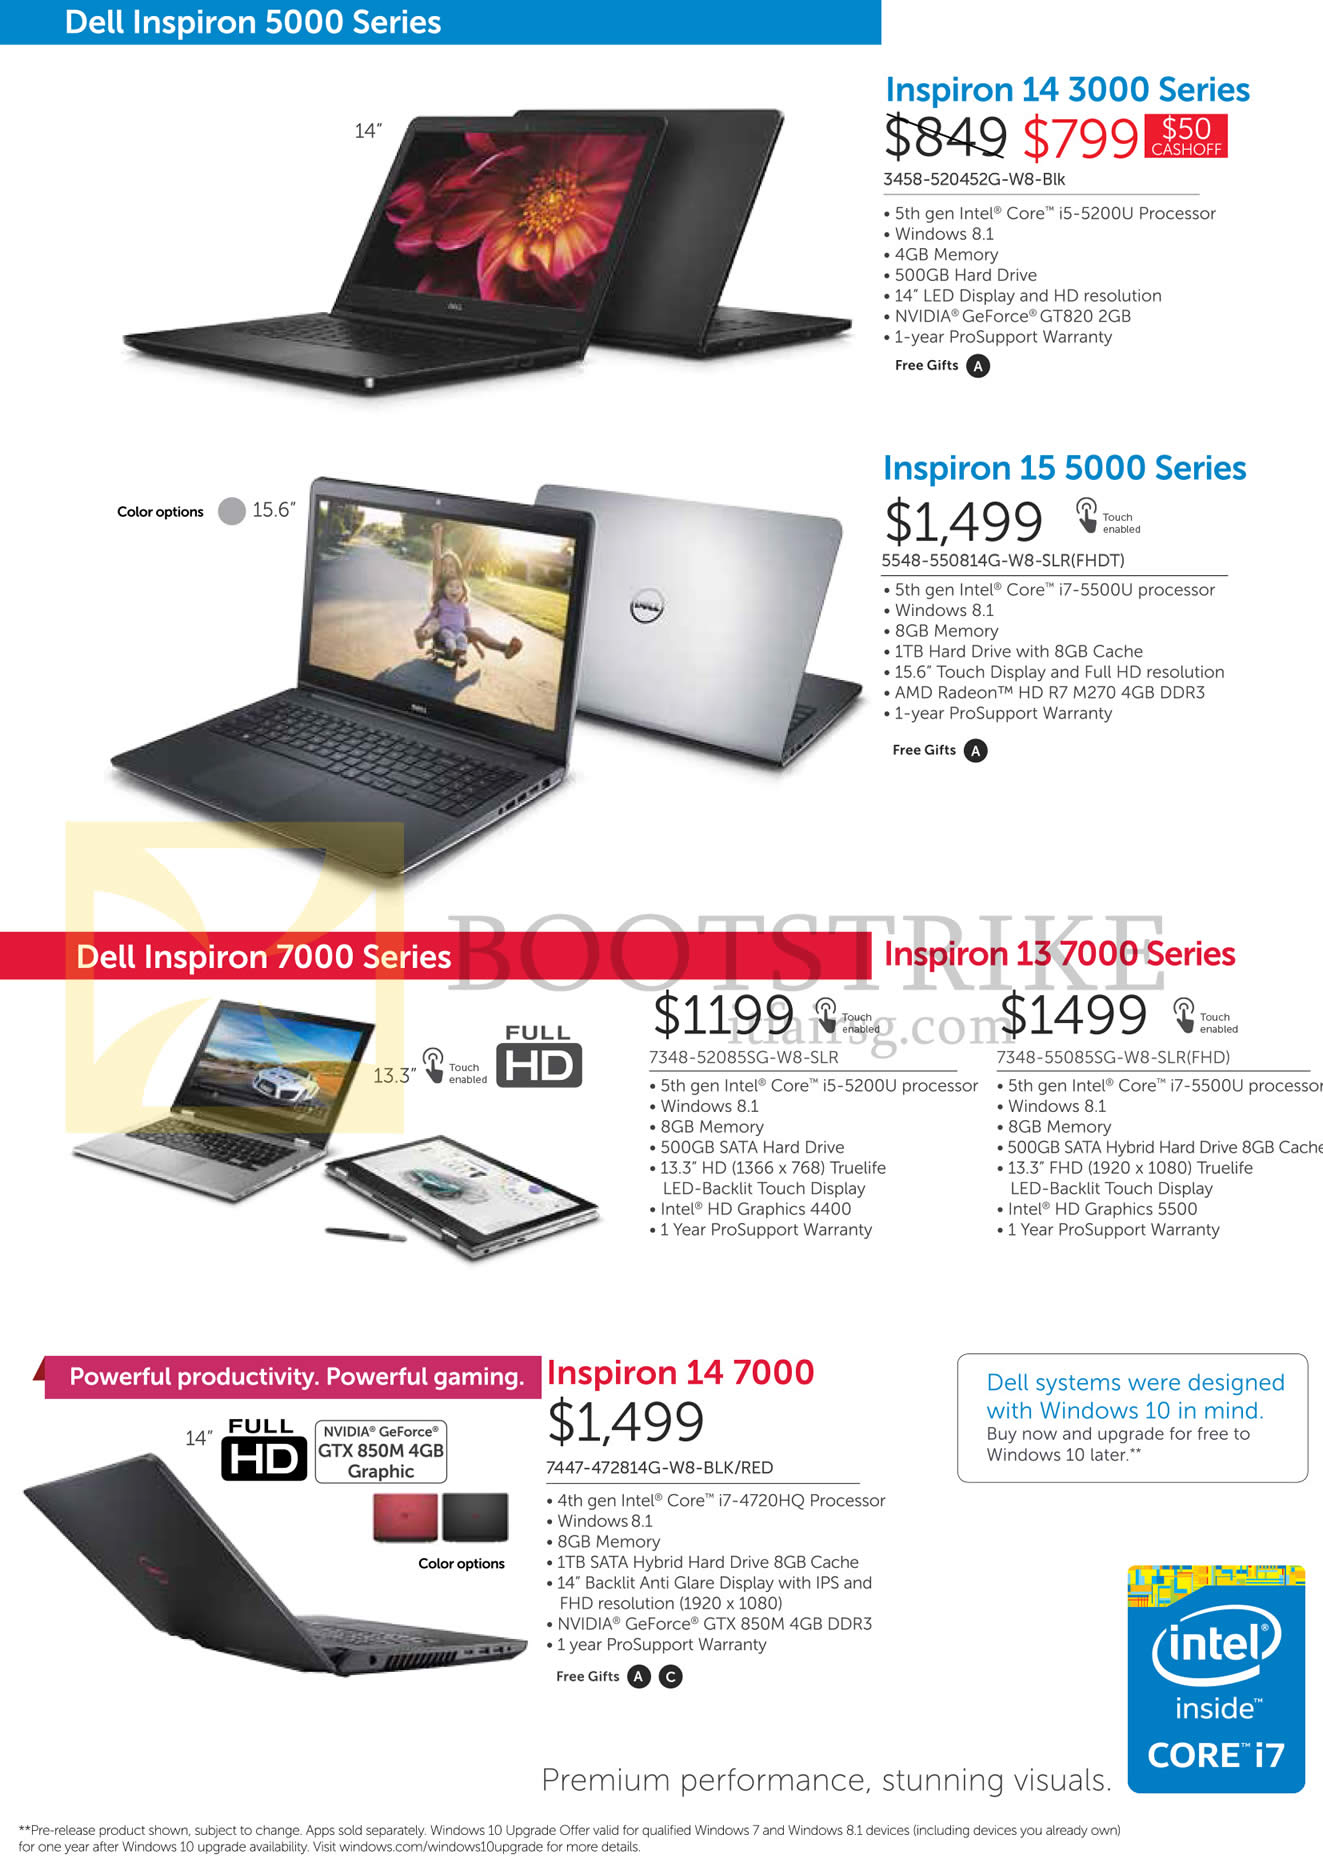 COMEX 2015 price list image brochure of Dell Notebooks Inspiron 14 3000, 15 5000, 13 7000, 14 7000 Series